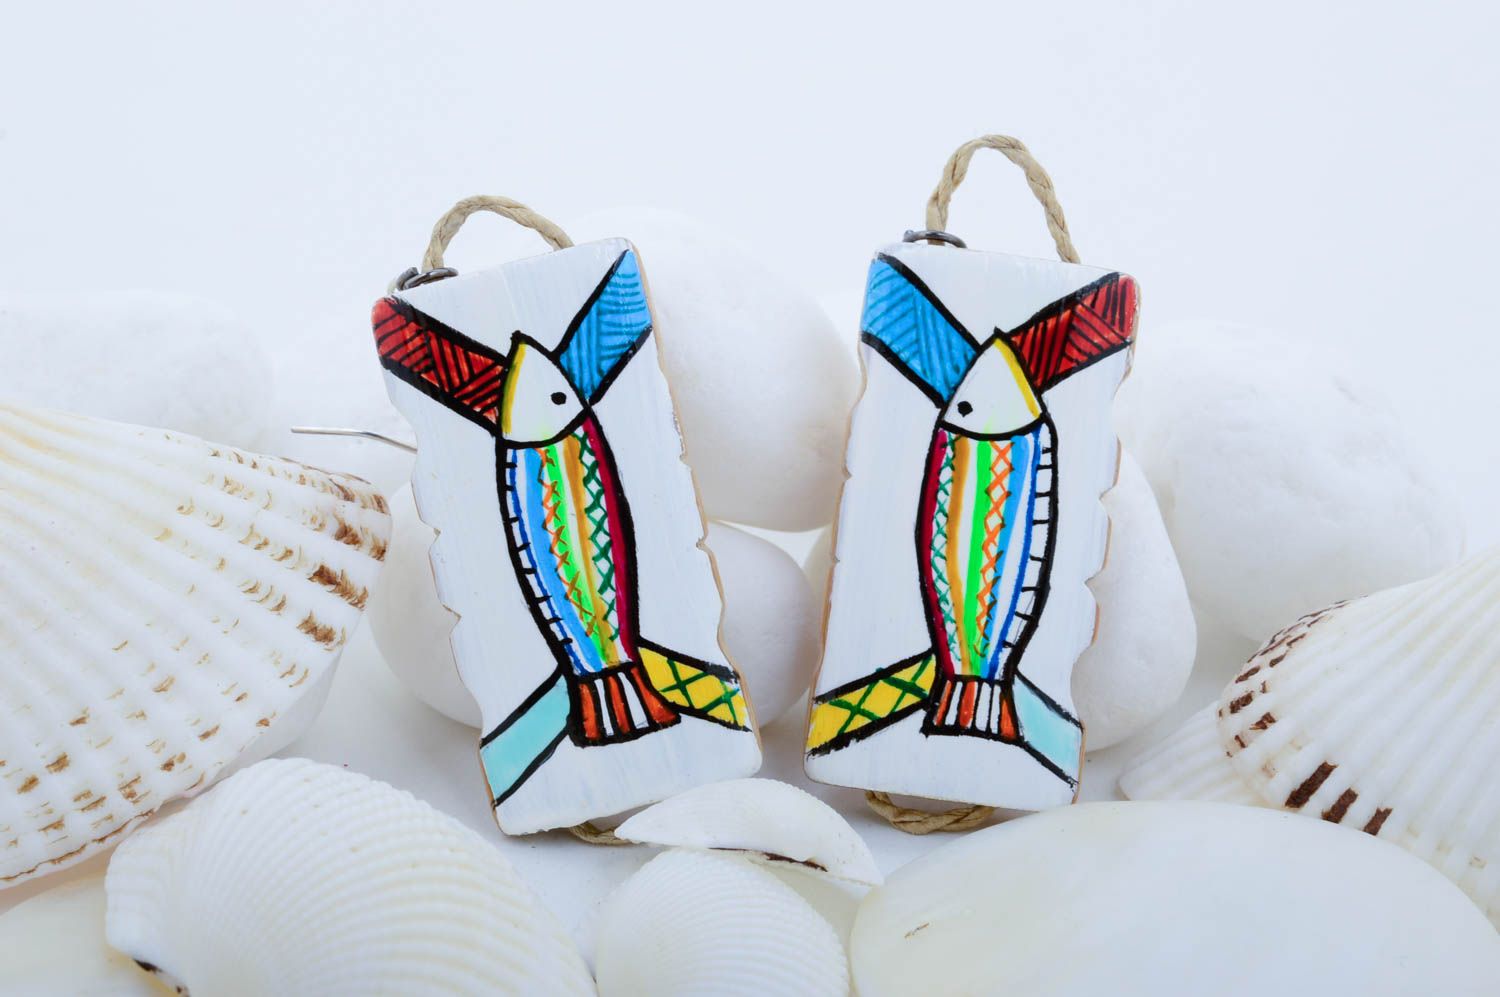 Elite handmade wooden earrings fashion trends contemporary jewelry designs photo 1